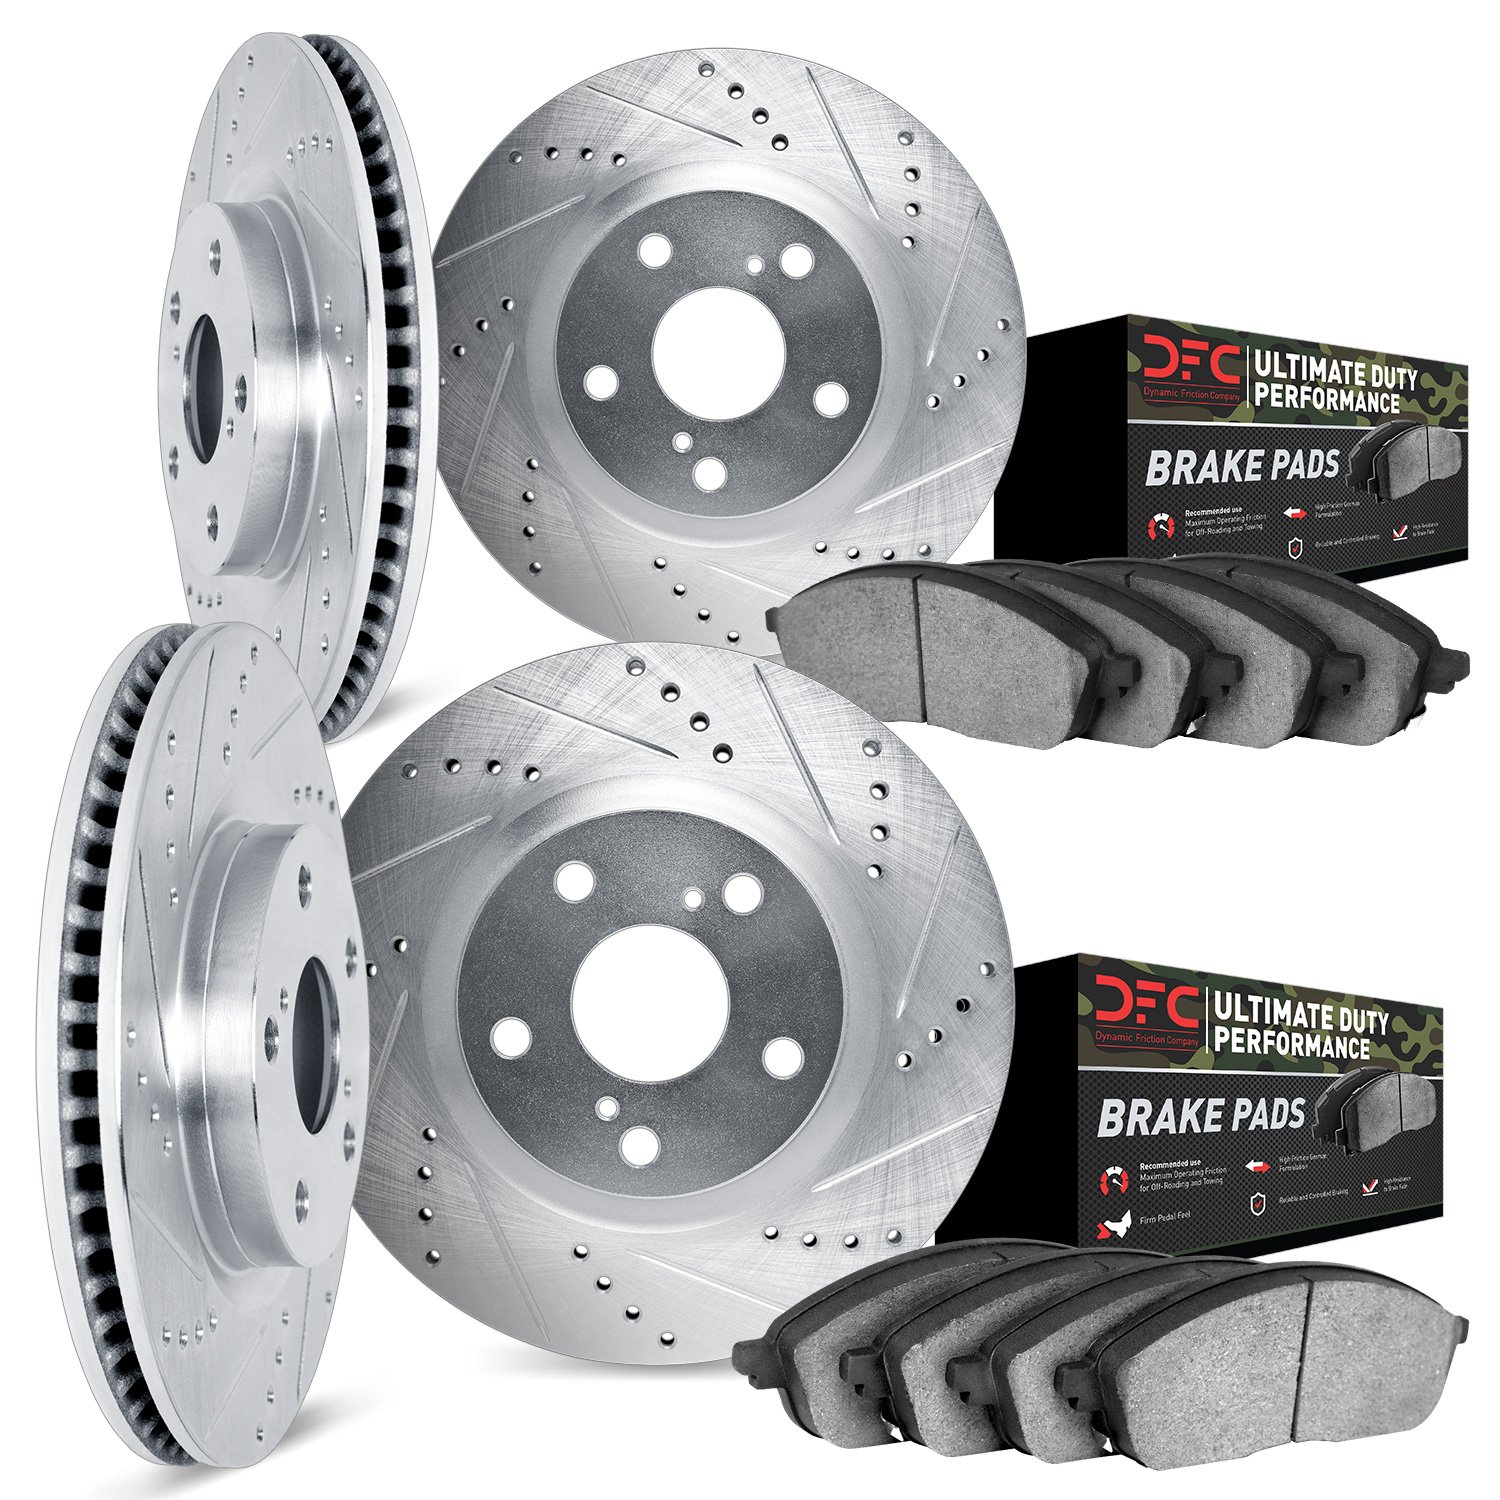 7404-47001 Drilled/Slotted Brake Rotors with Ultimate-Duty Brake Pads Kit [Silver], 1989-1992 GM, Position: Front and Rear